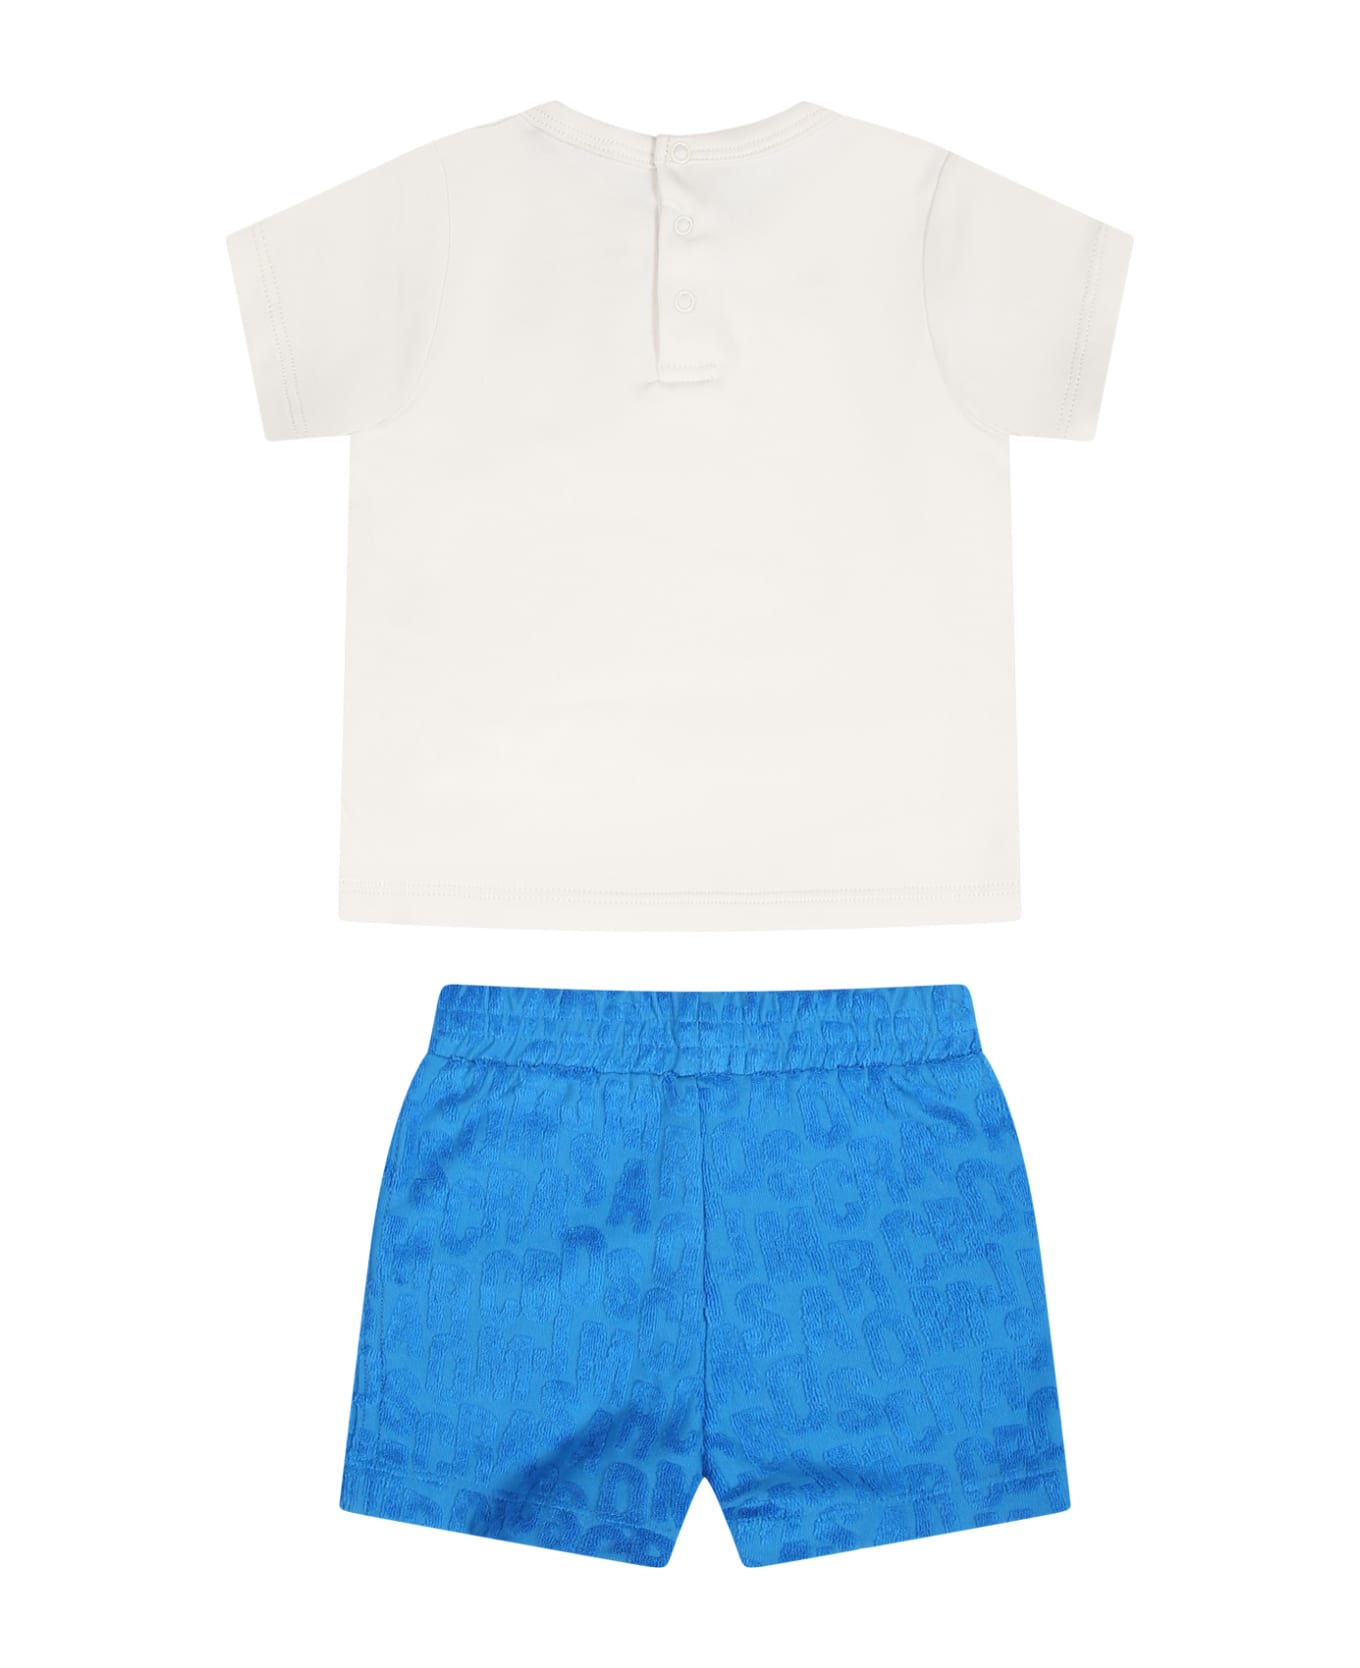 Marc Jacobs Blue Sports Outfit For Newborns With Logo - Light Blue